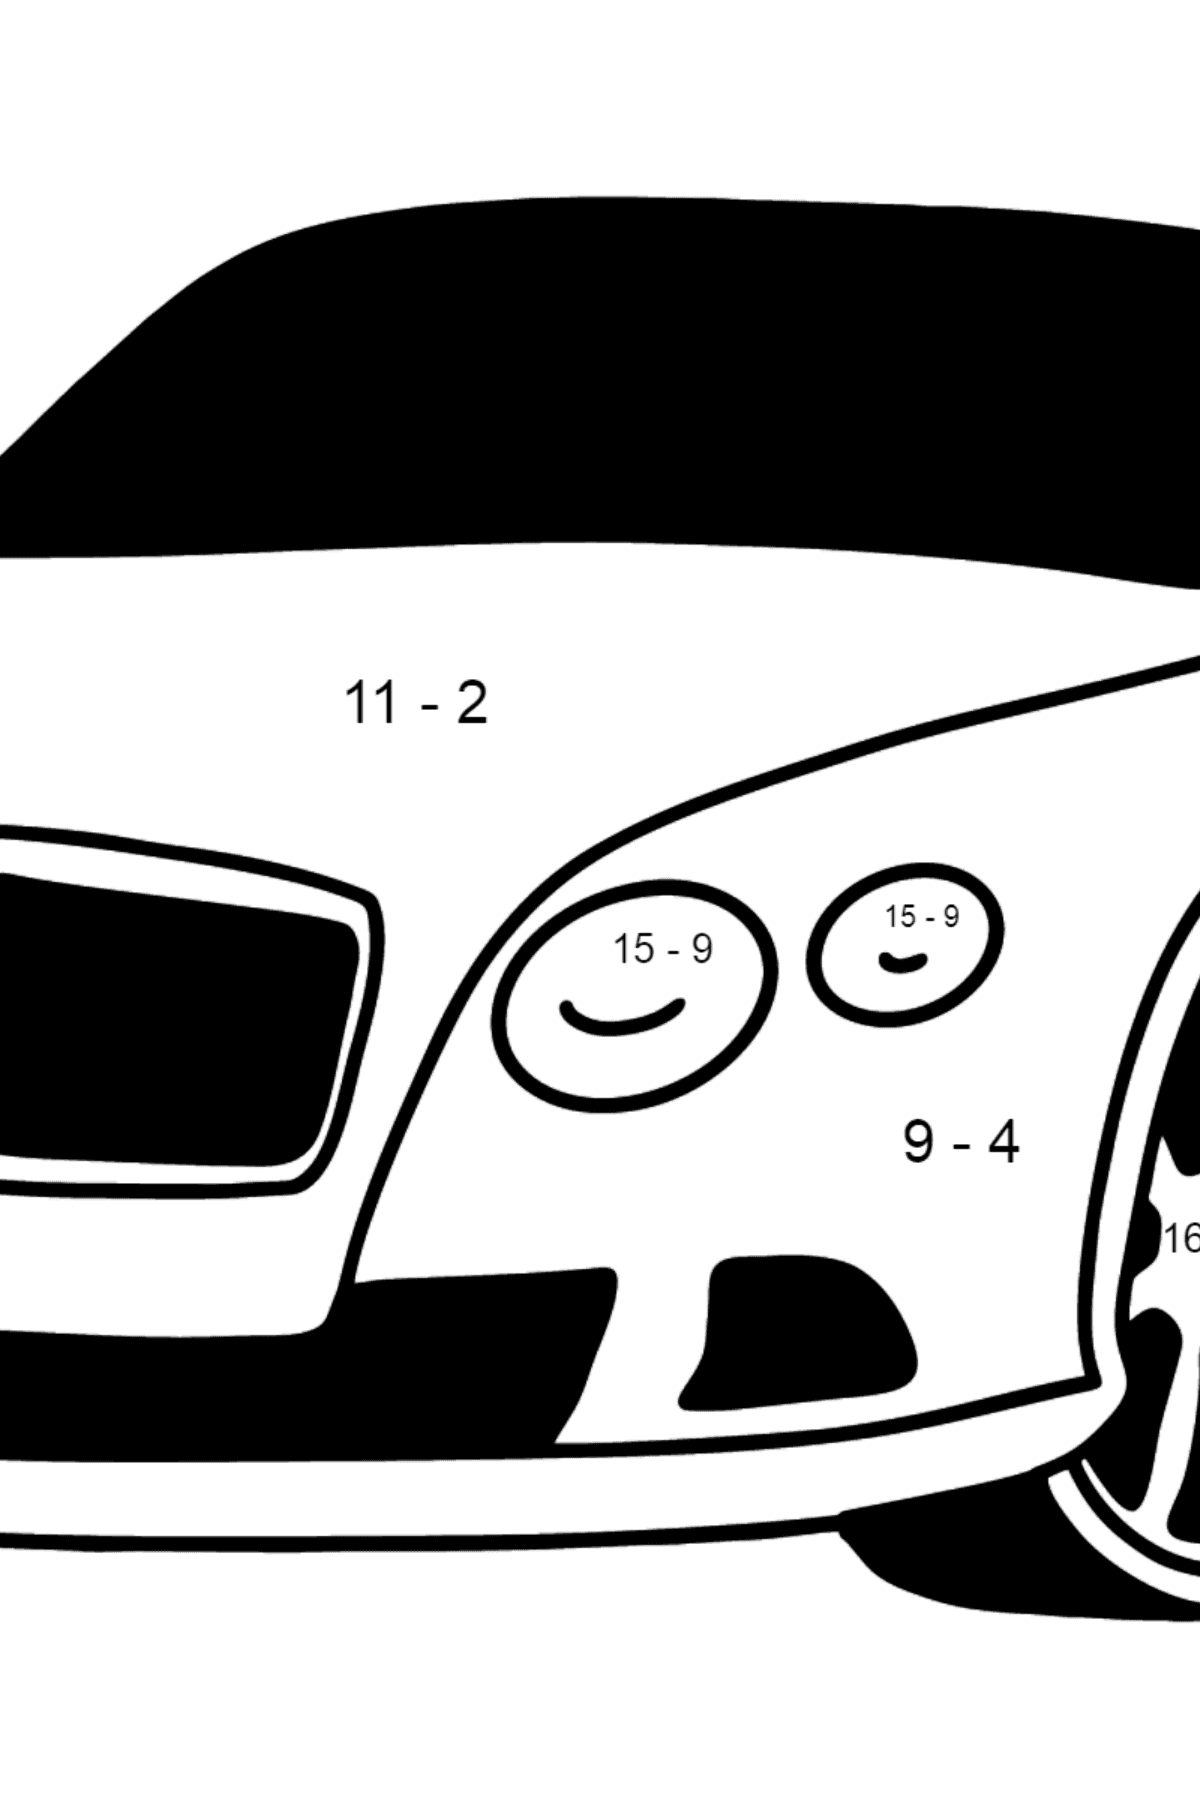 Bentley Continental GT Car coloring page - Math Coloring - Subtraction for Kids